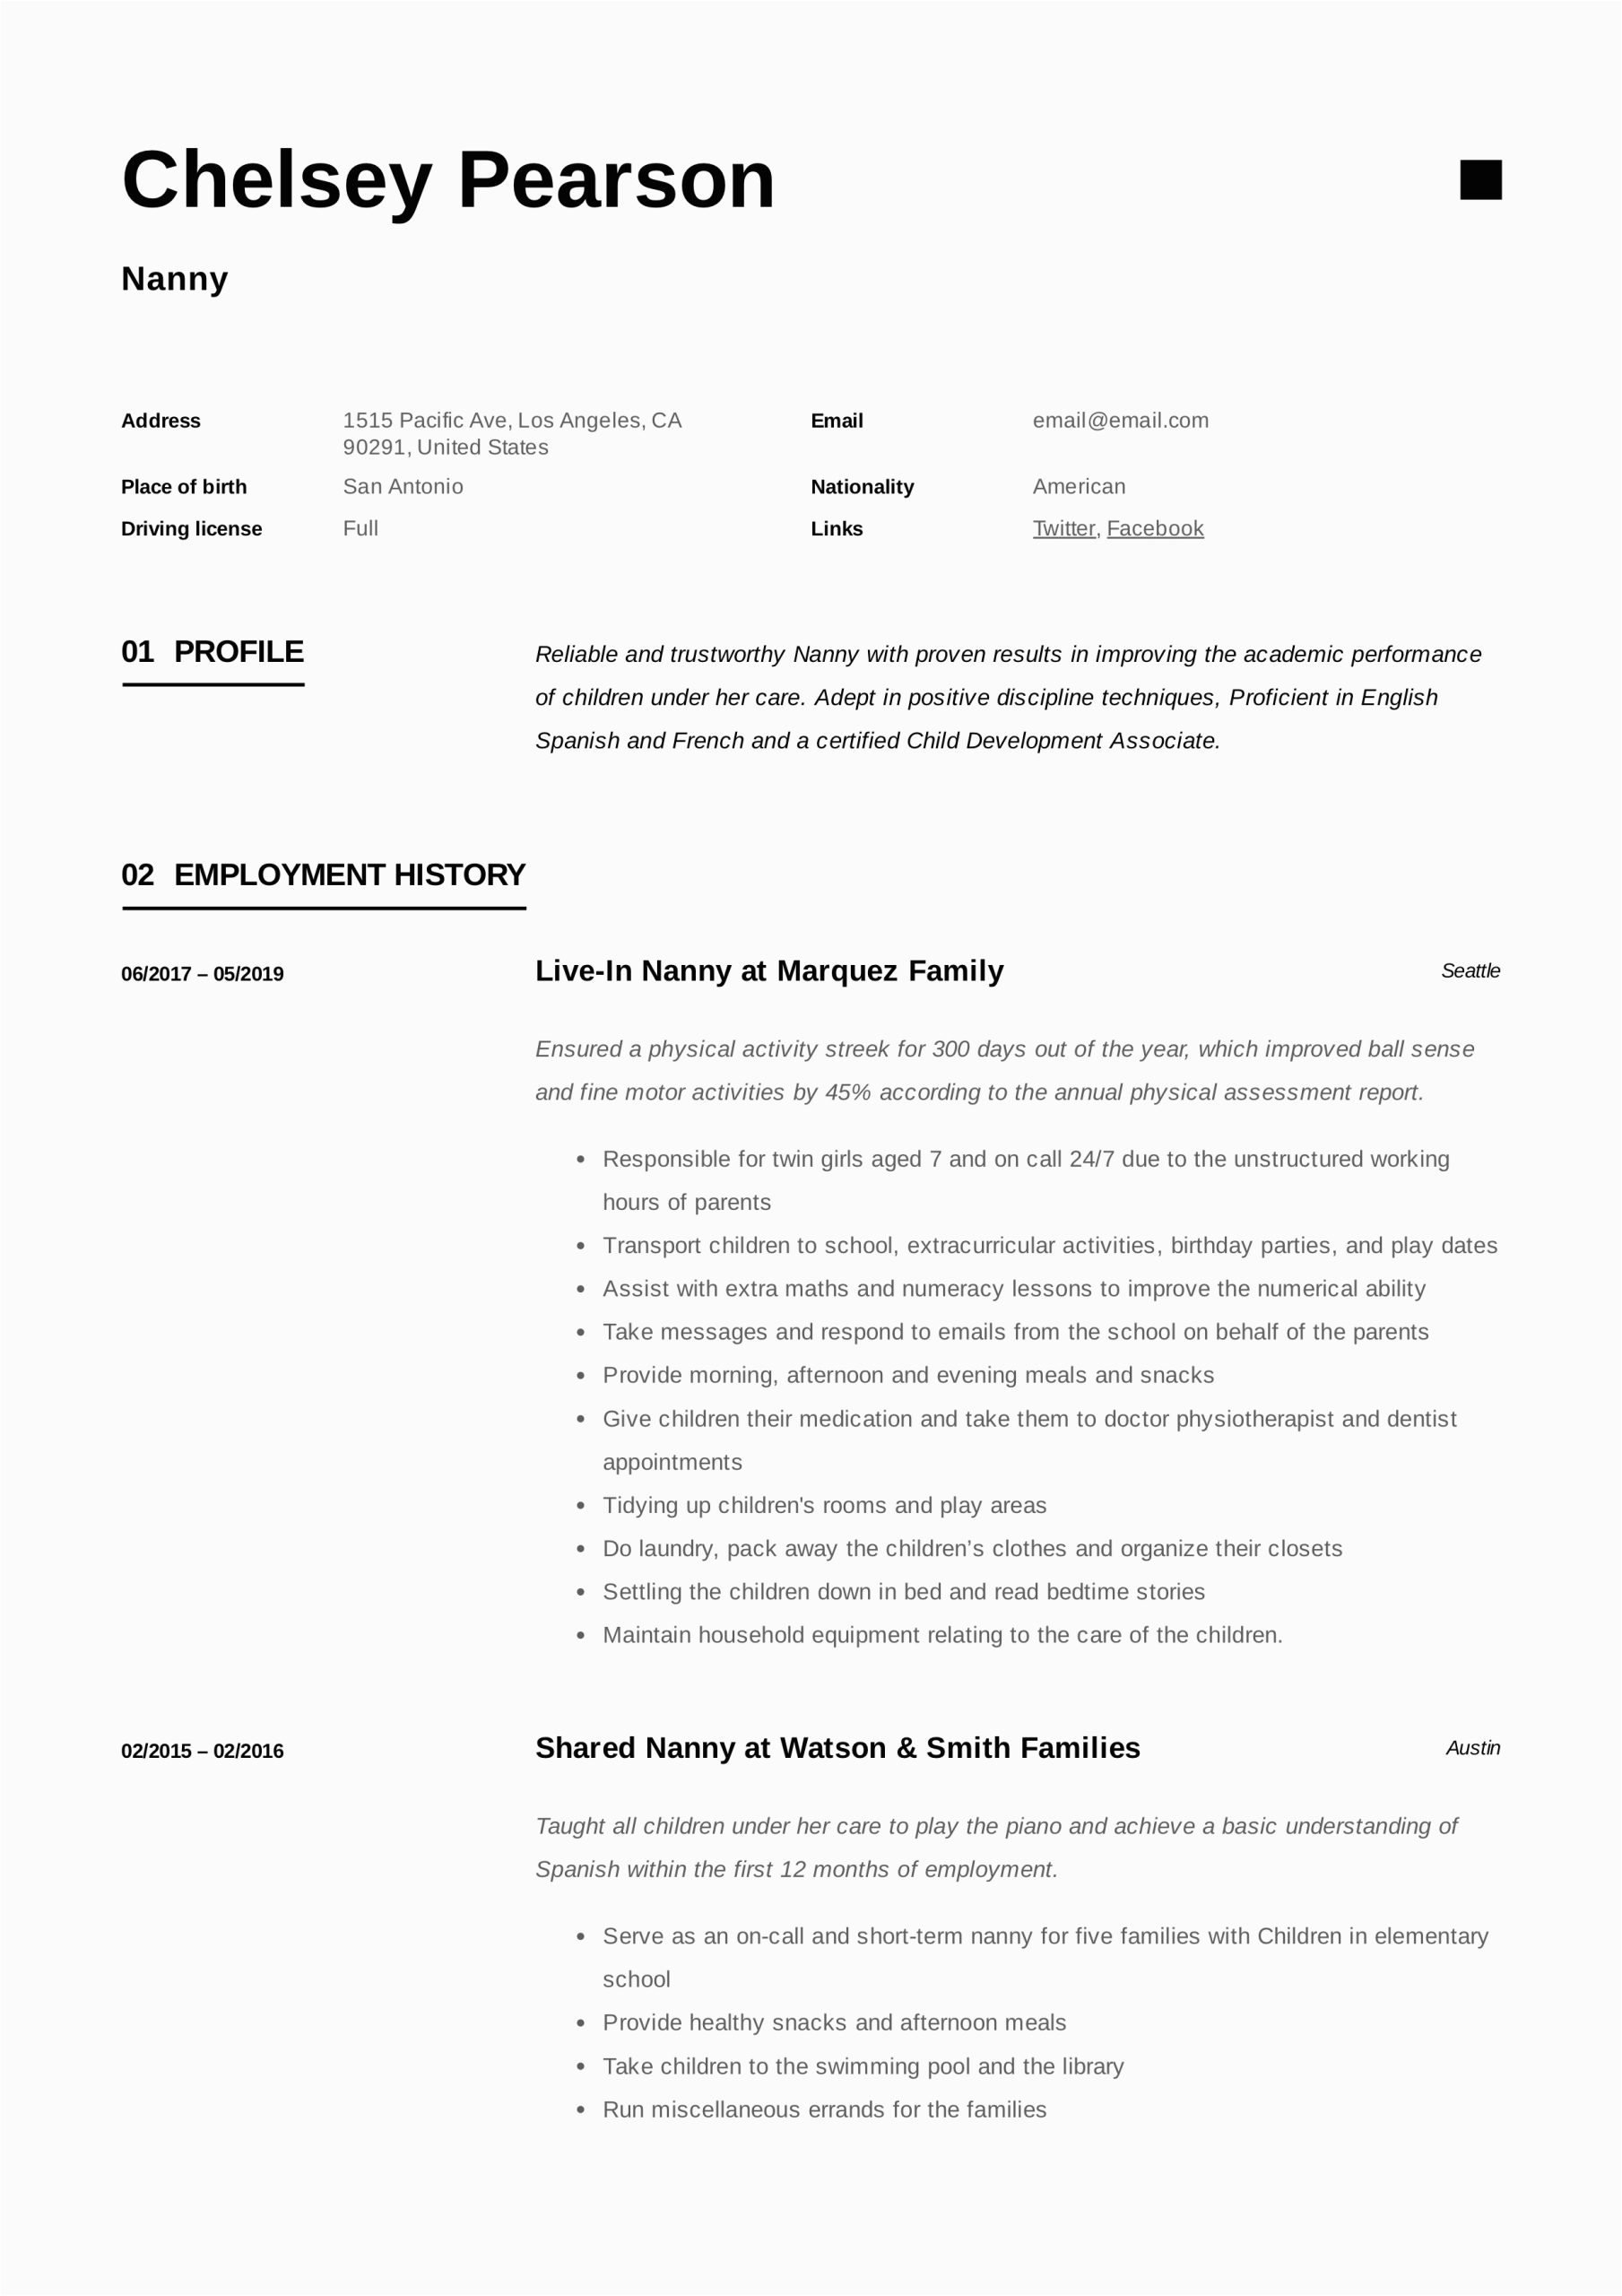 Nanny Resumes Samples I Can Copy and Paste Nanny Resume & Writing Guide 12 Template Samples